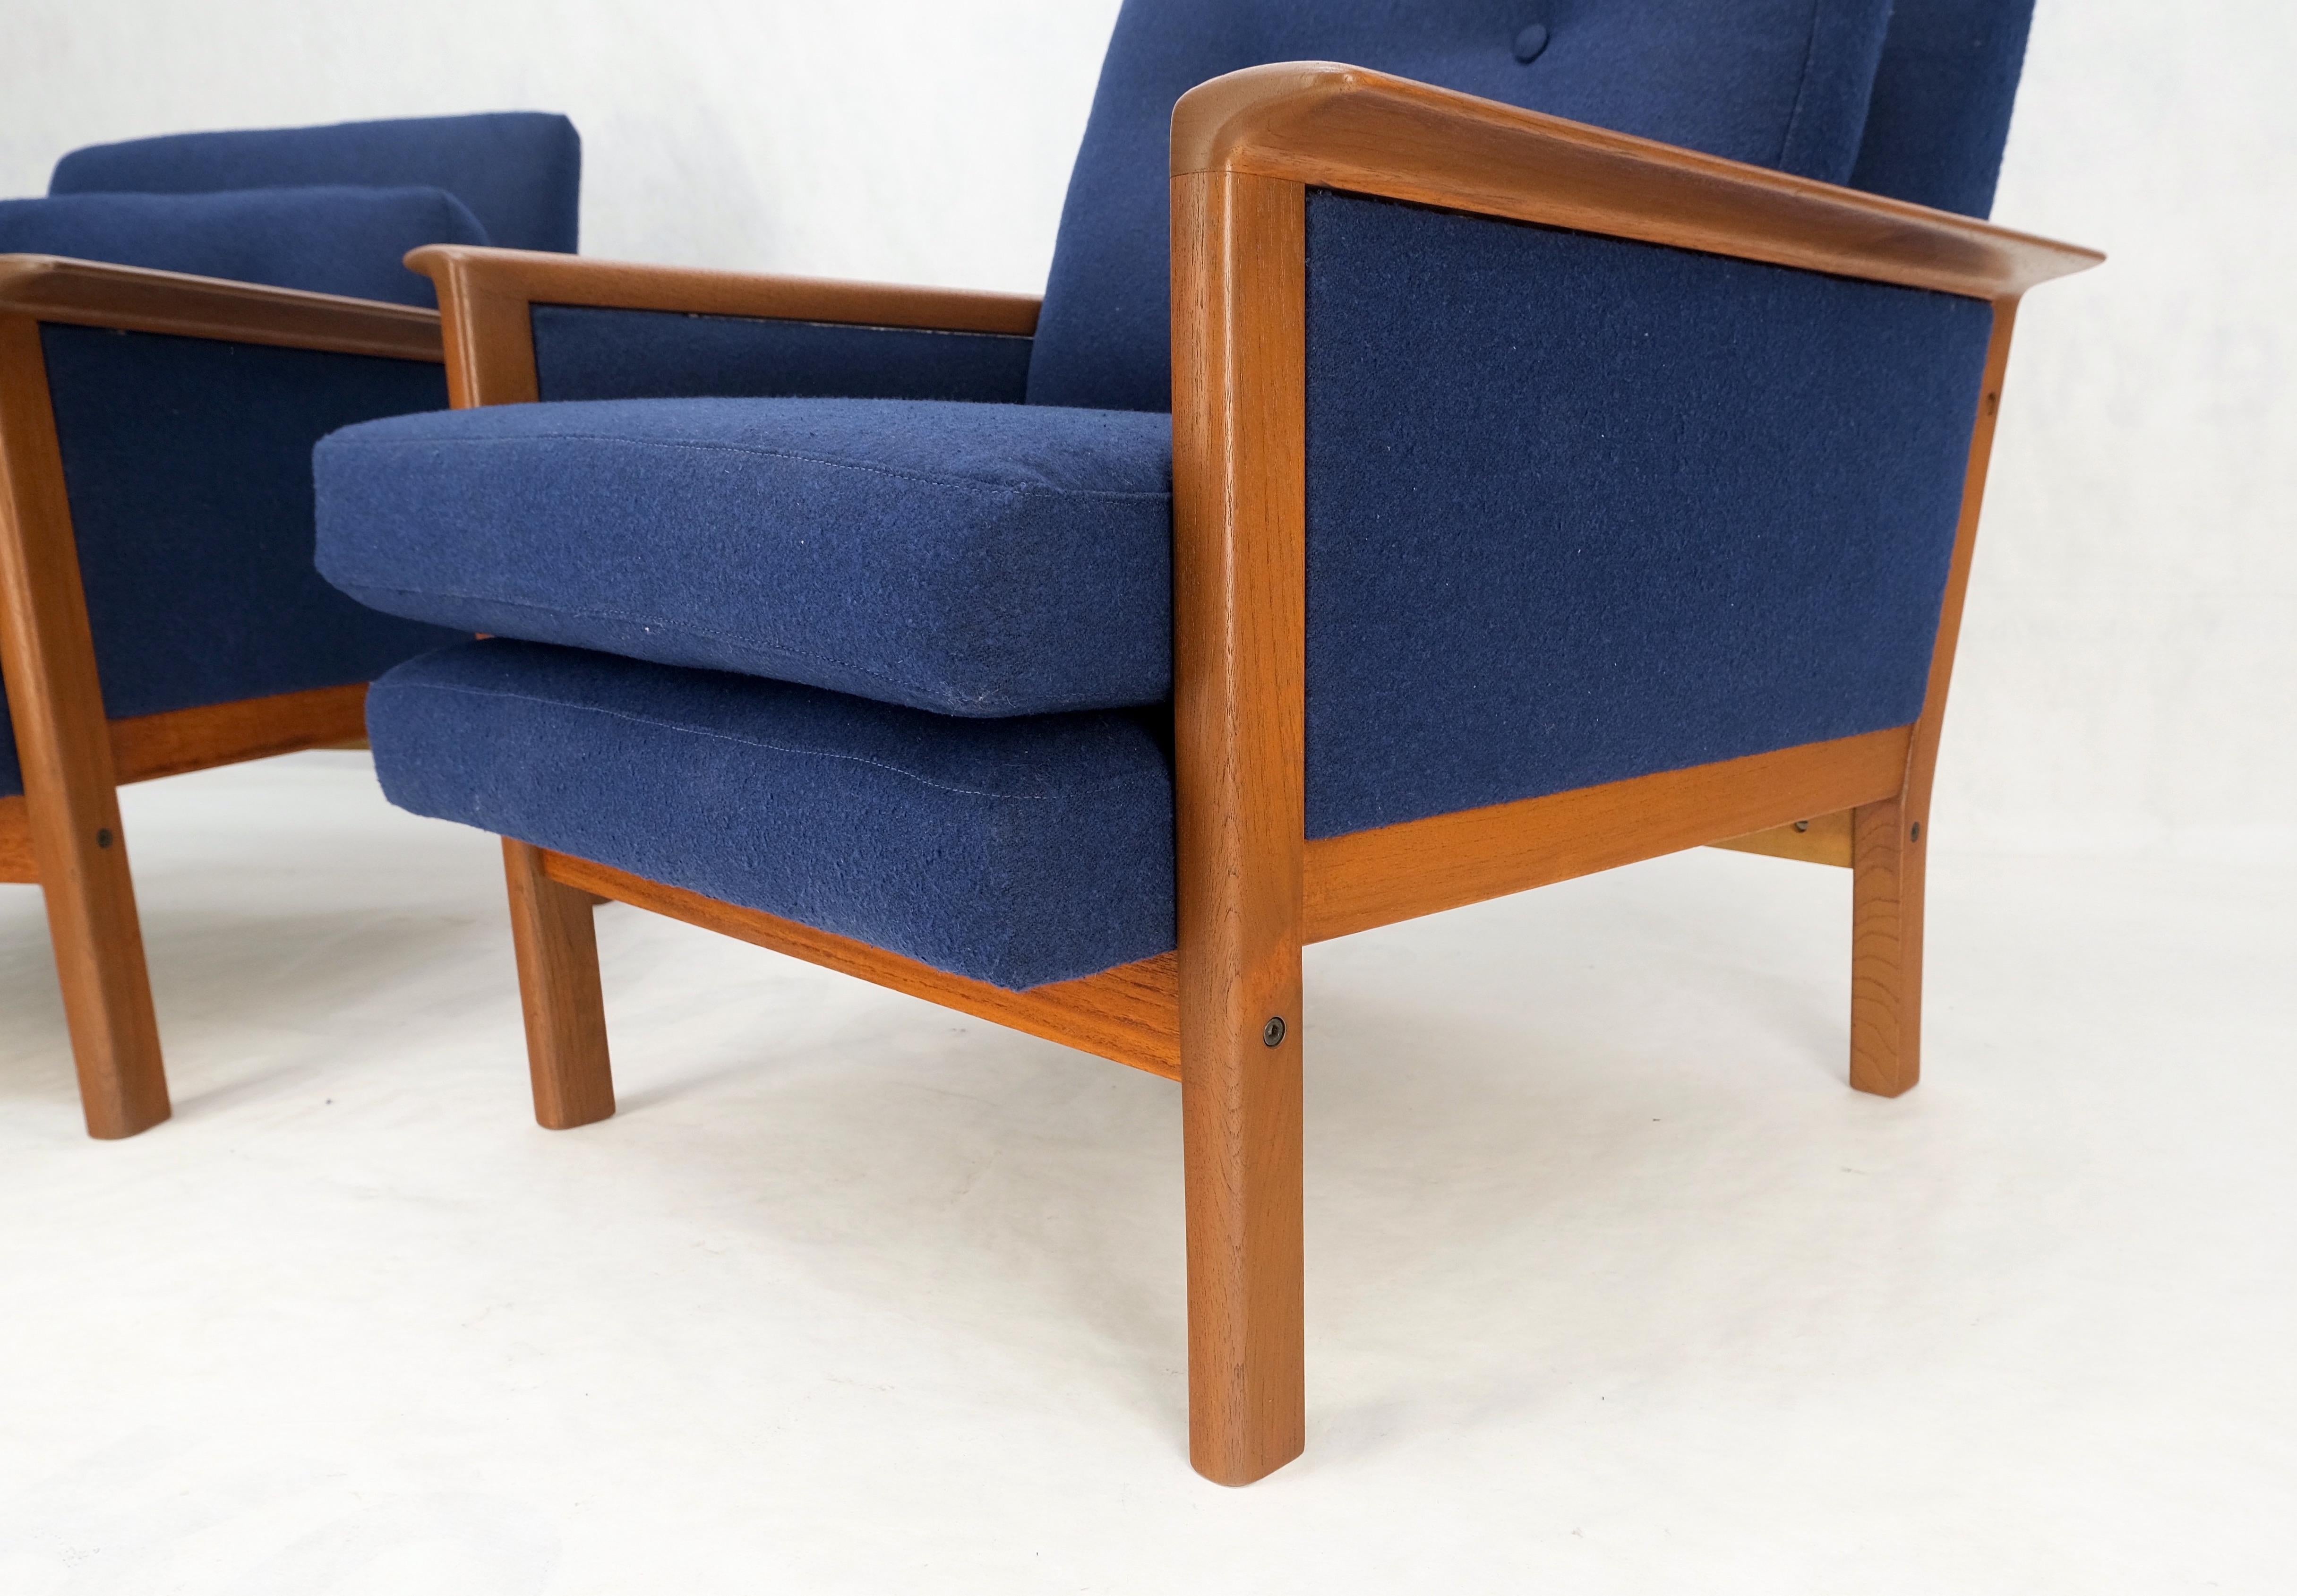 Pair of His & Hers Danish Mid-Century Modern Teak Frames New Wool Upholstery Lounge Chairs Refinished, MINT!

Higher chair: 30×28x37, seat height: 16''
Smaller chair: 28x28x27.5, seat height: 16''.